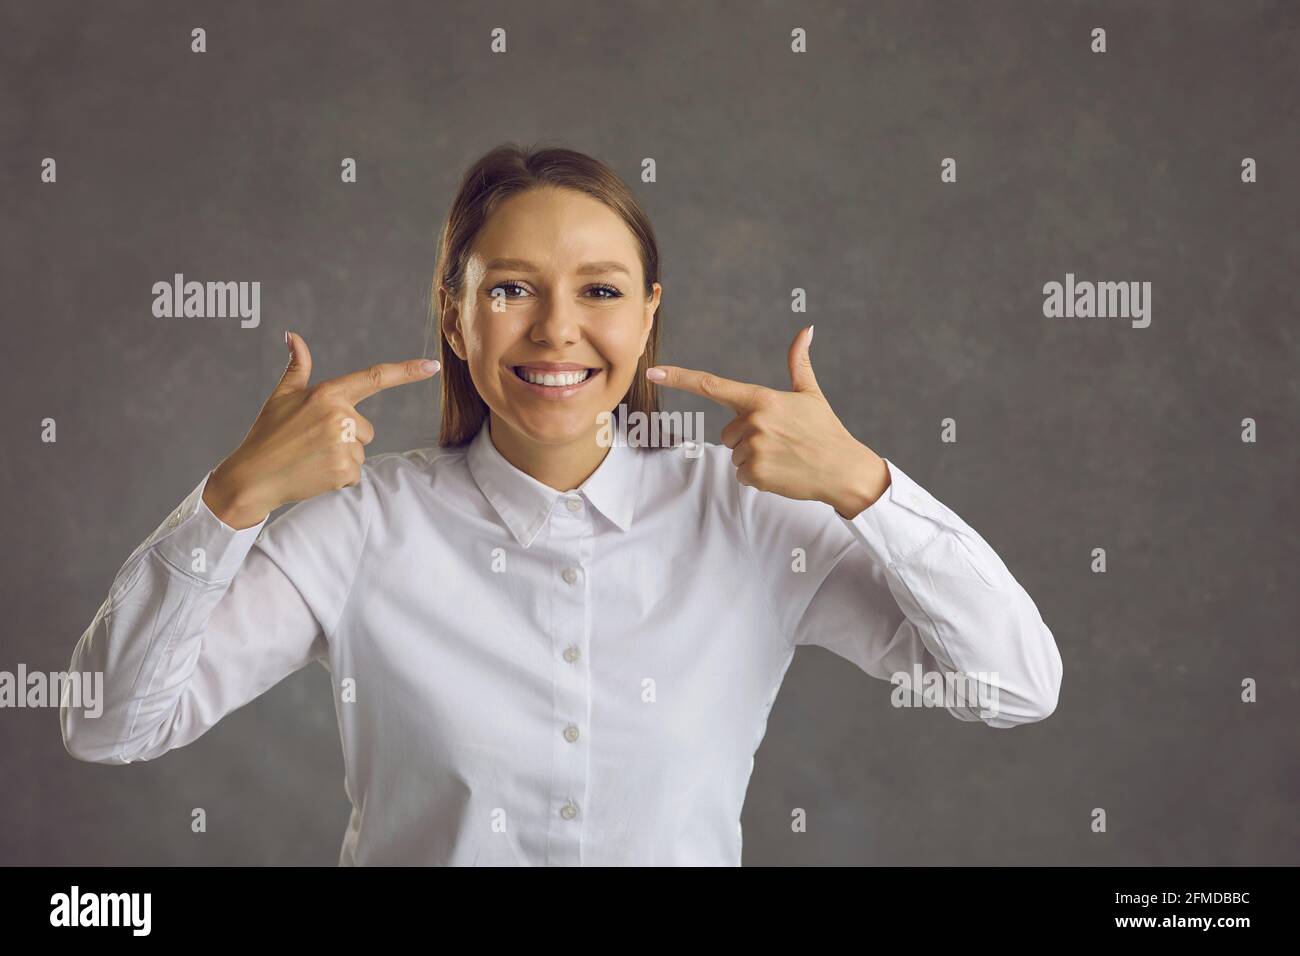 Young woman pointing with double index finger to white teeth smile studio shot Stock Photo